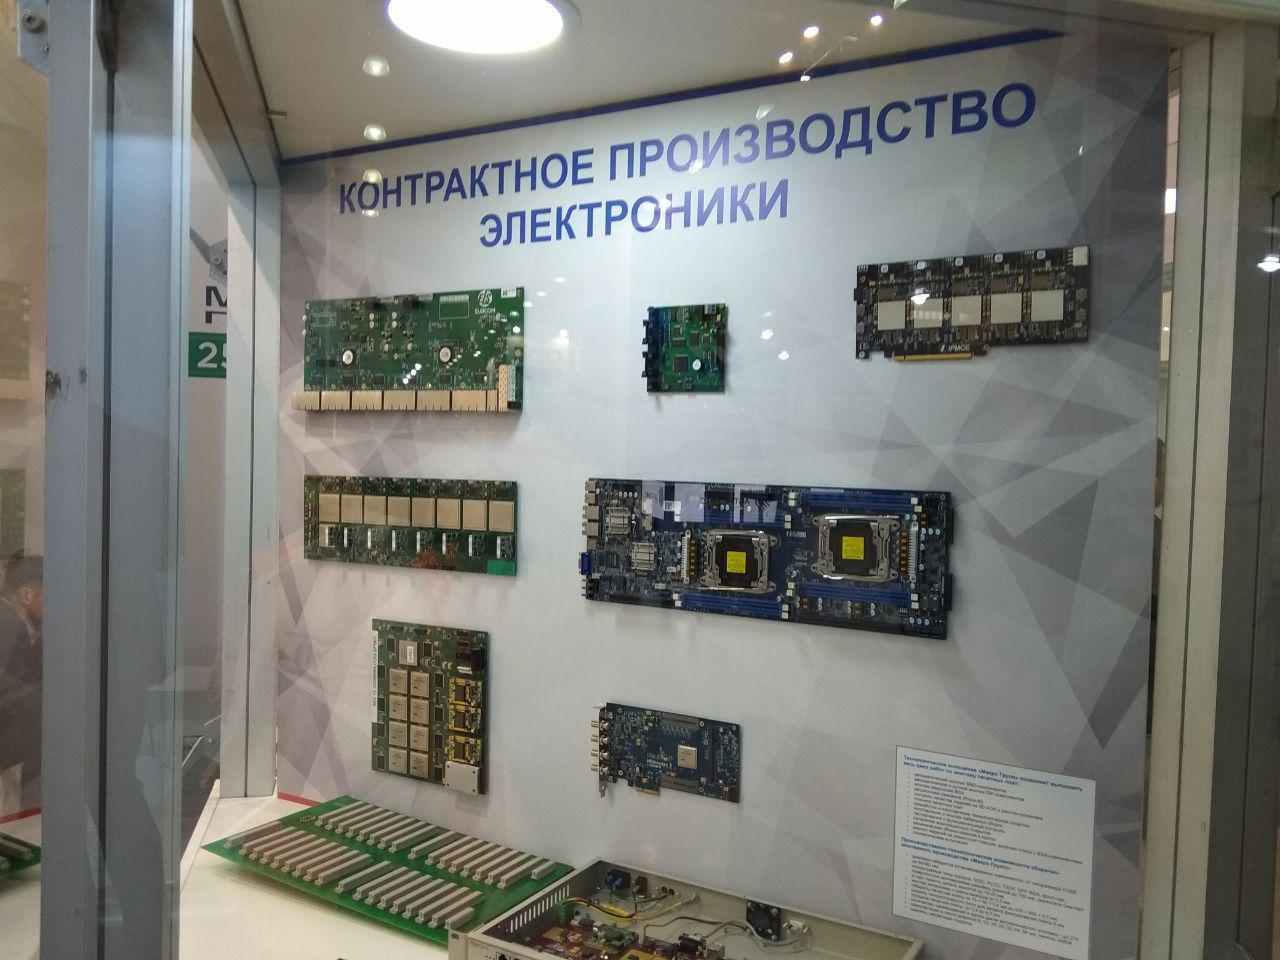 TH Group visited the 22th Exhibition ExpoElectronica 2019